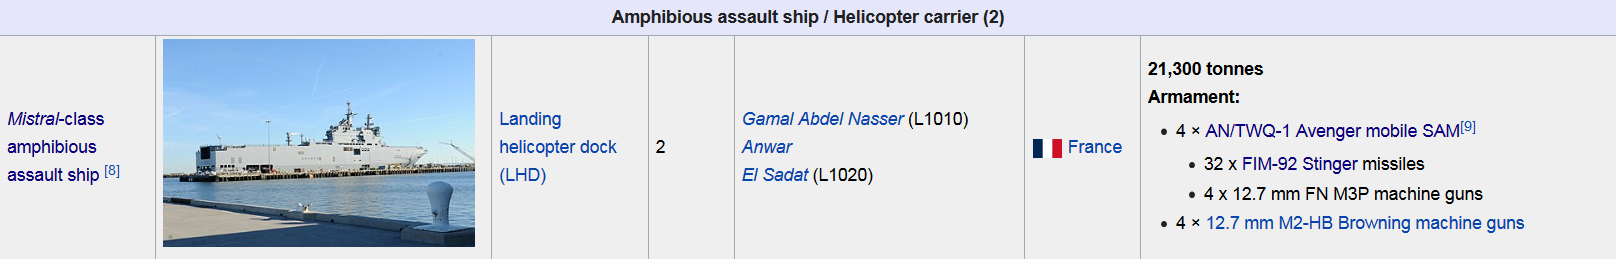 Screenshot_2022-12-10 List of ships of the Egyptian Navy - Wikipedia(2).png